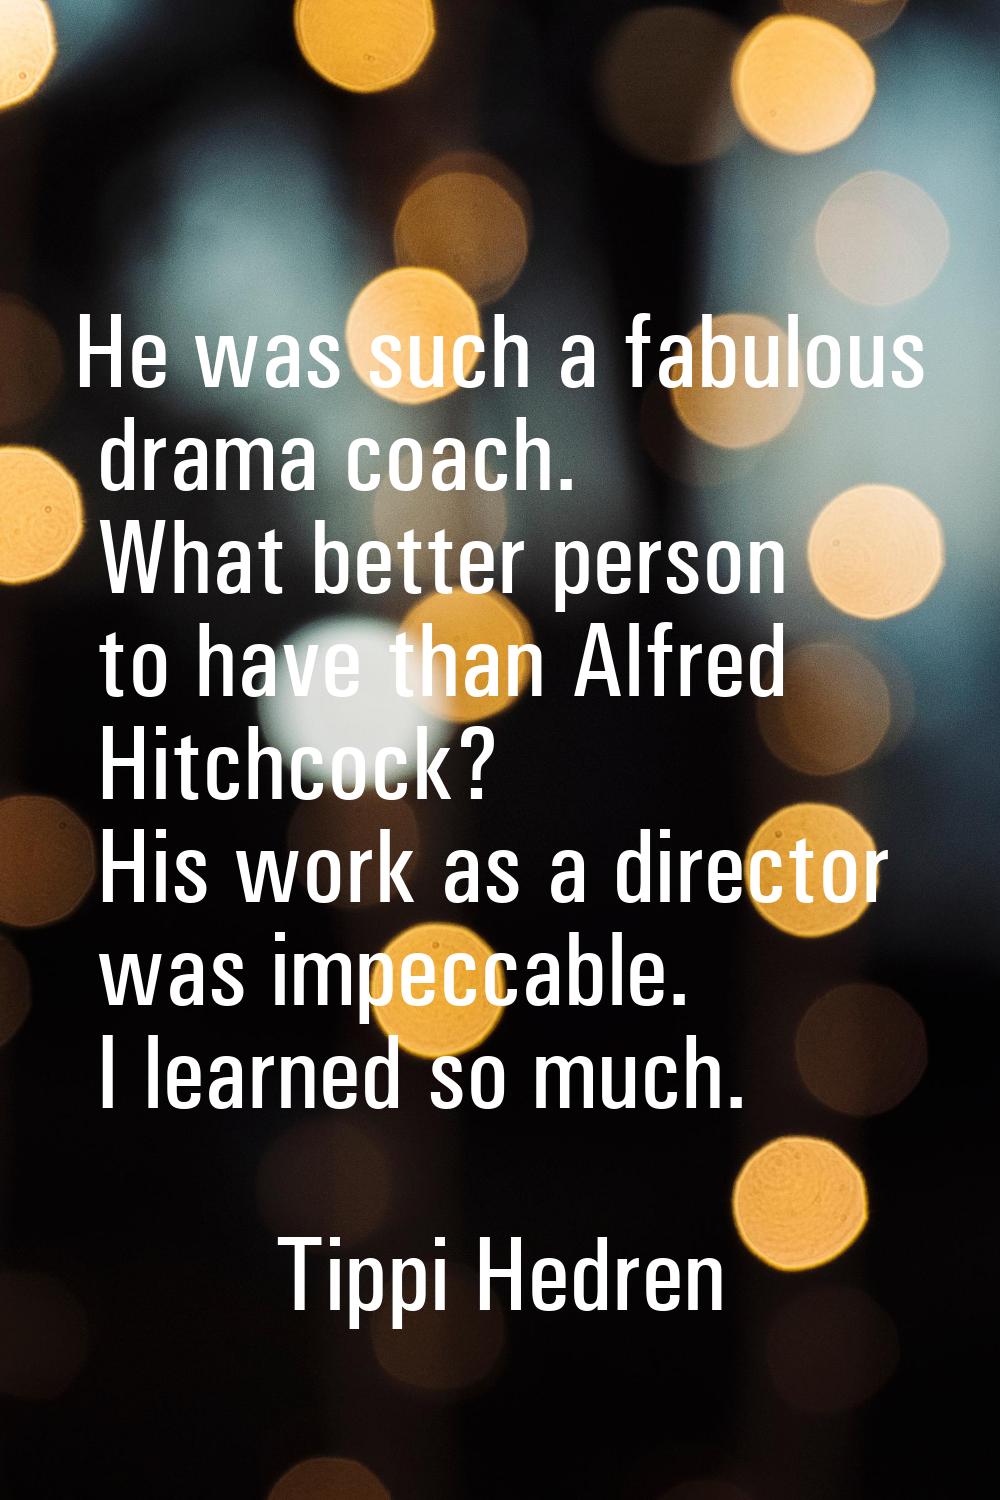 He was such a fabulous drama coach. What better person to have than Alfred Hitchcock? His work as a